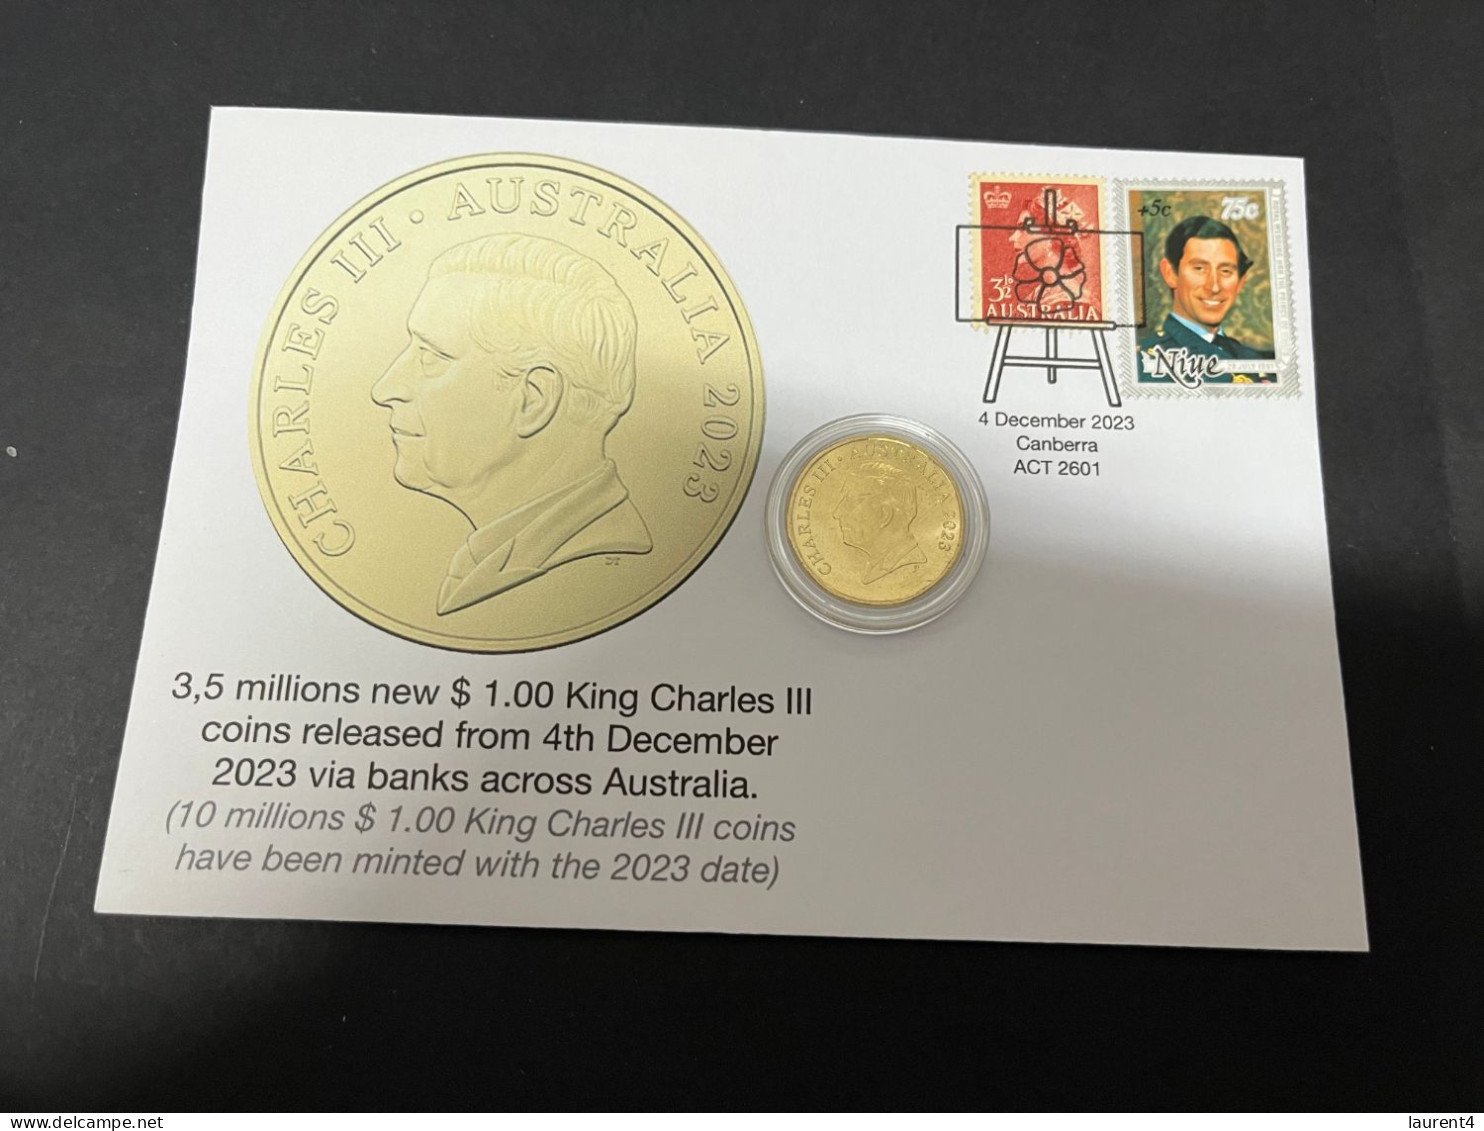 (18-12-2023) (2 W 29A) $ 1.00 King Charles III New $ 1.00 Australian Coin (released 4-12-2023) Prince Charles Niue Stamp - Dollar